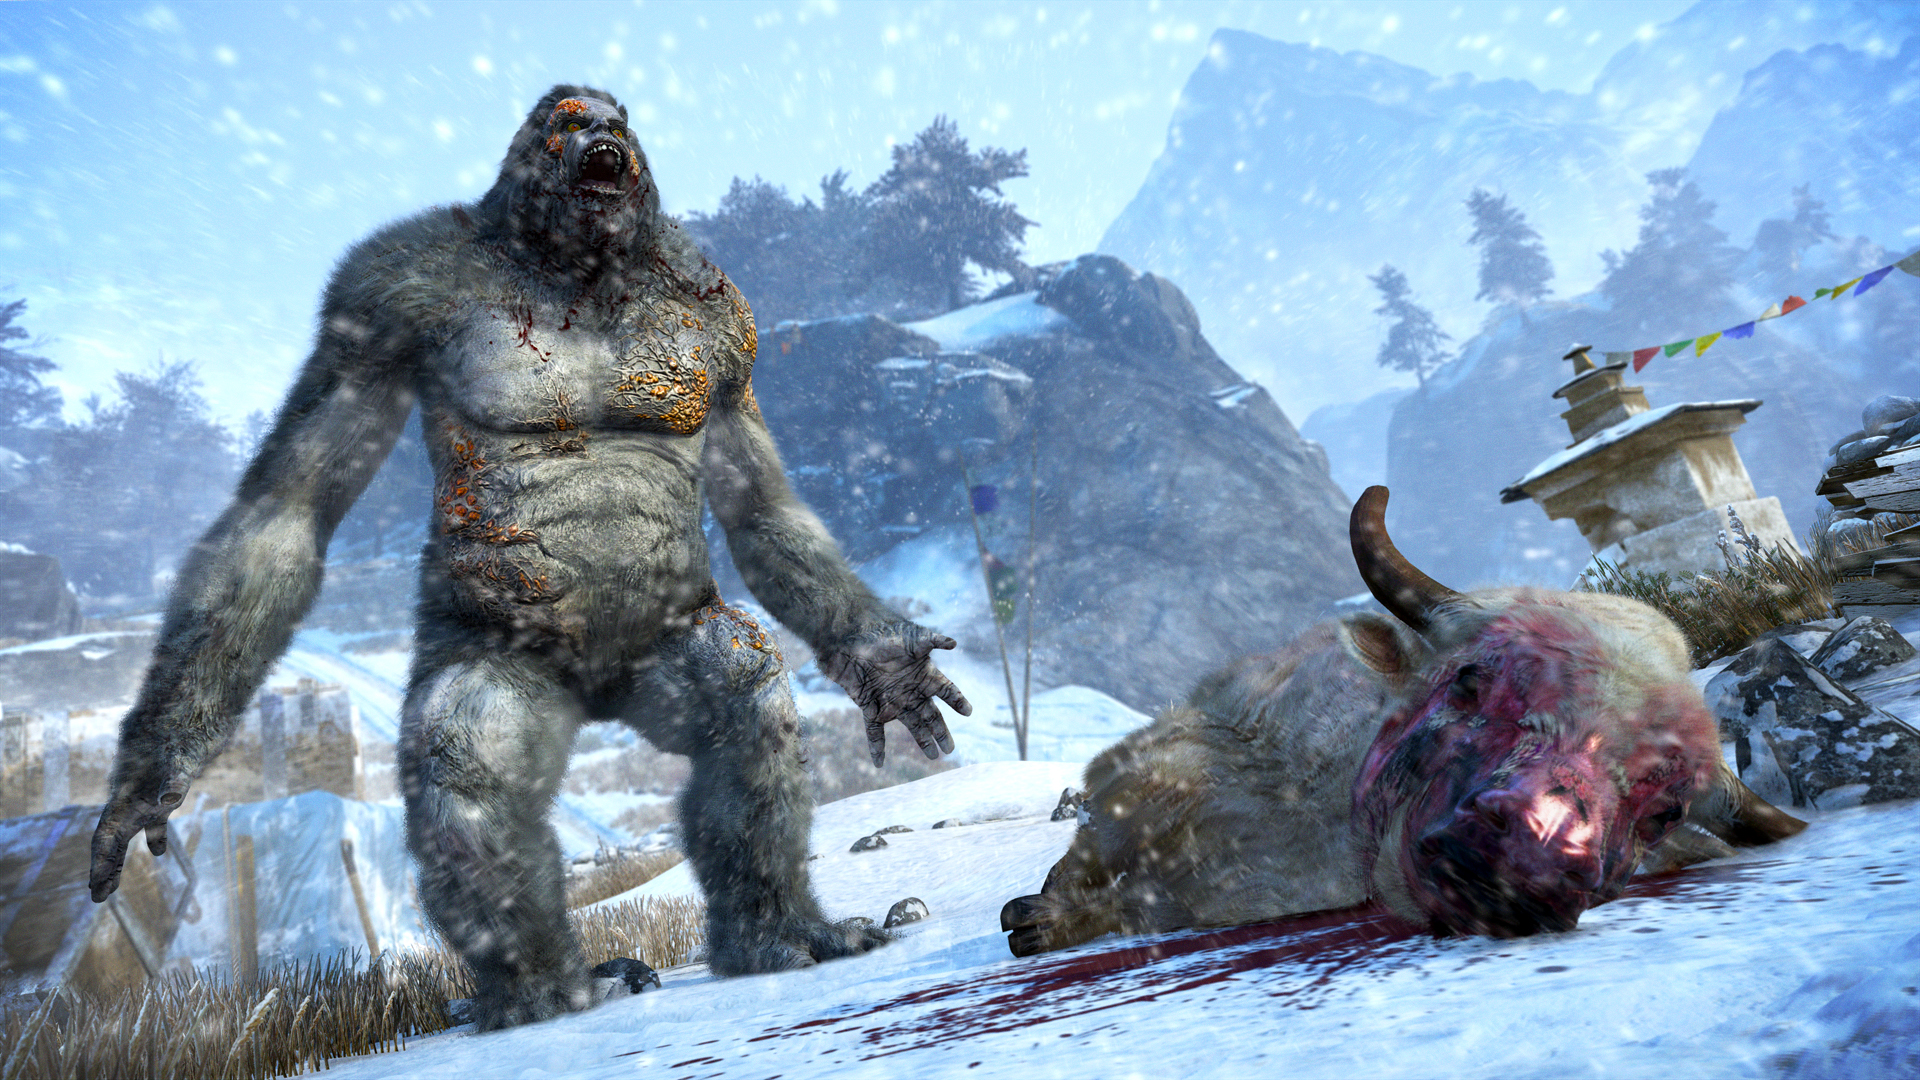 Far Cry® 4 Valley of the Yetis on Steam